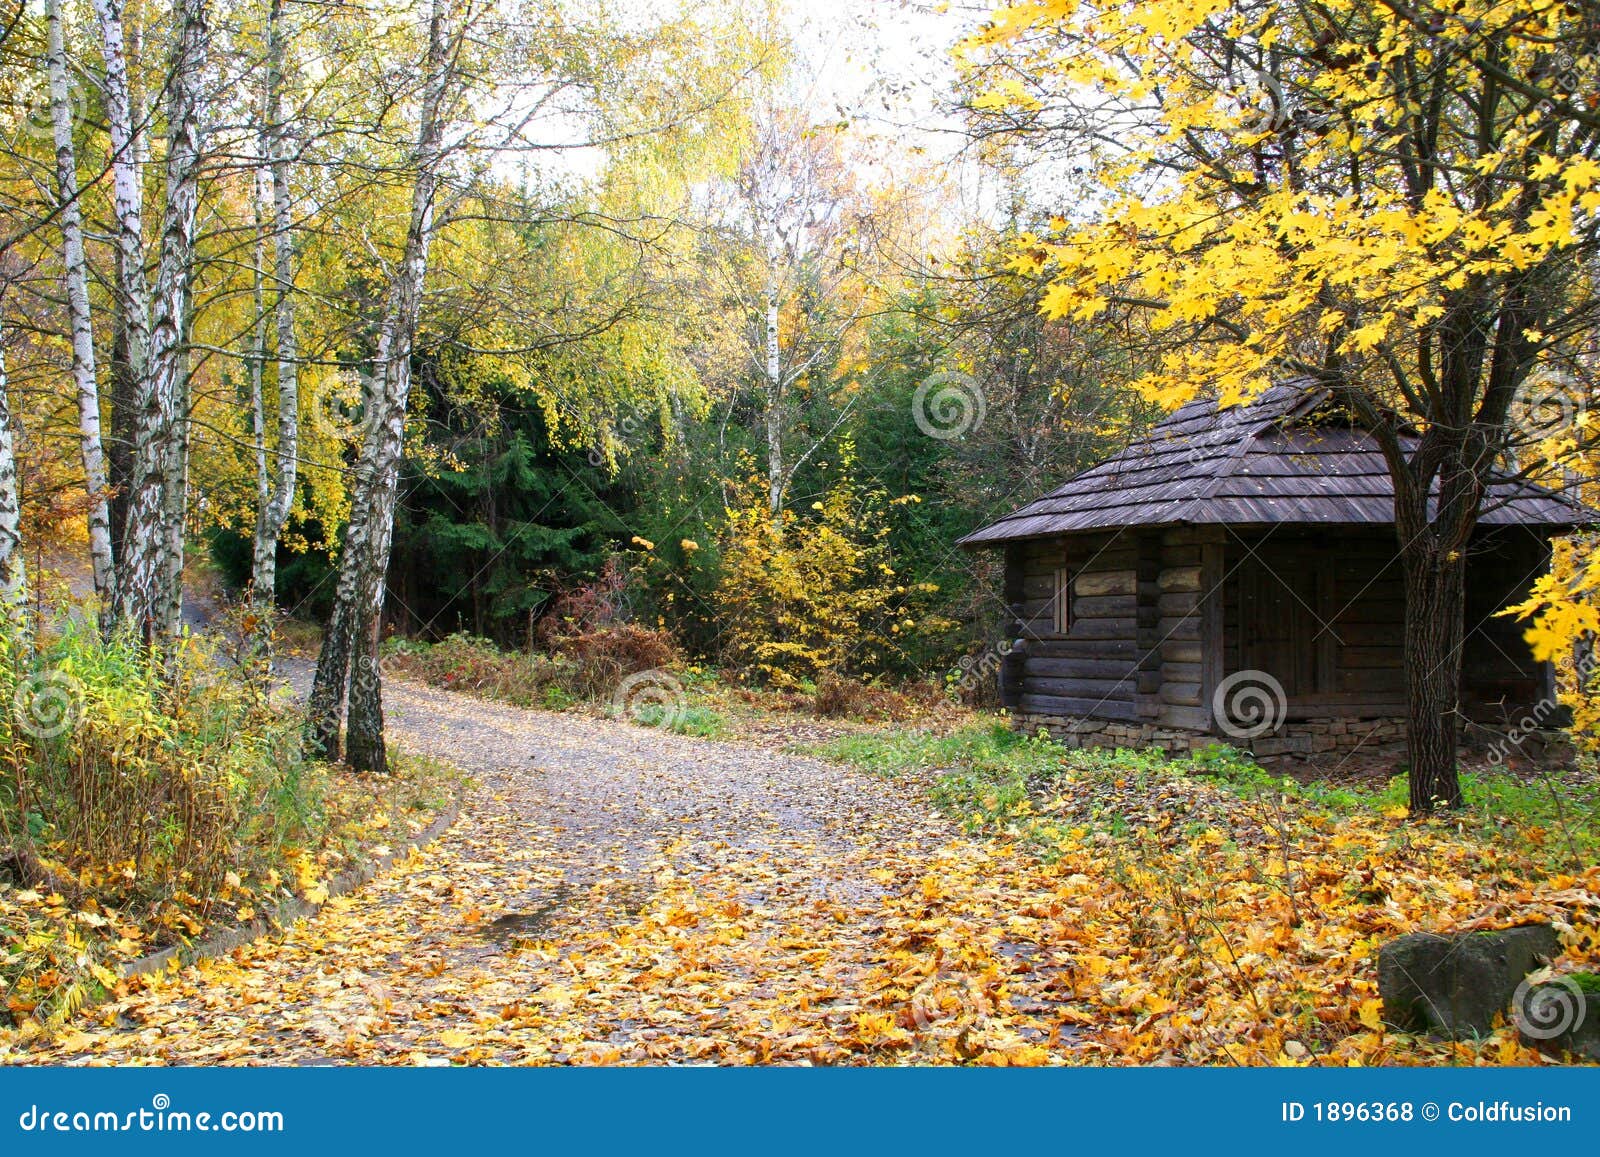 Royalty Free Stock Photos: House in a forest - Autumn Landscape